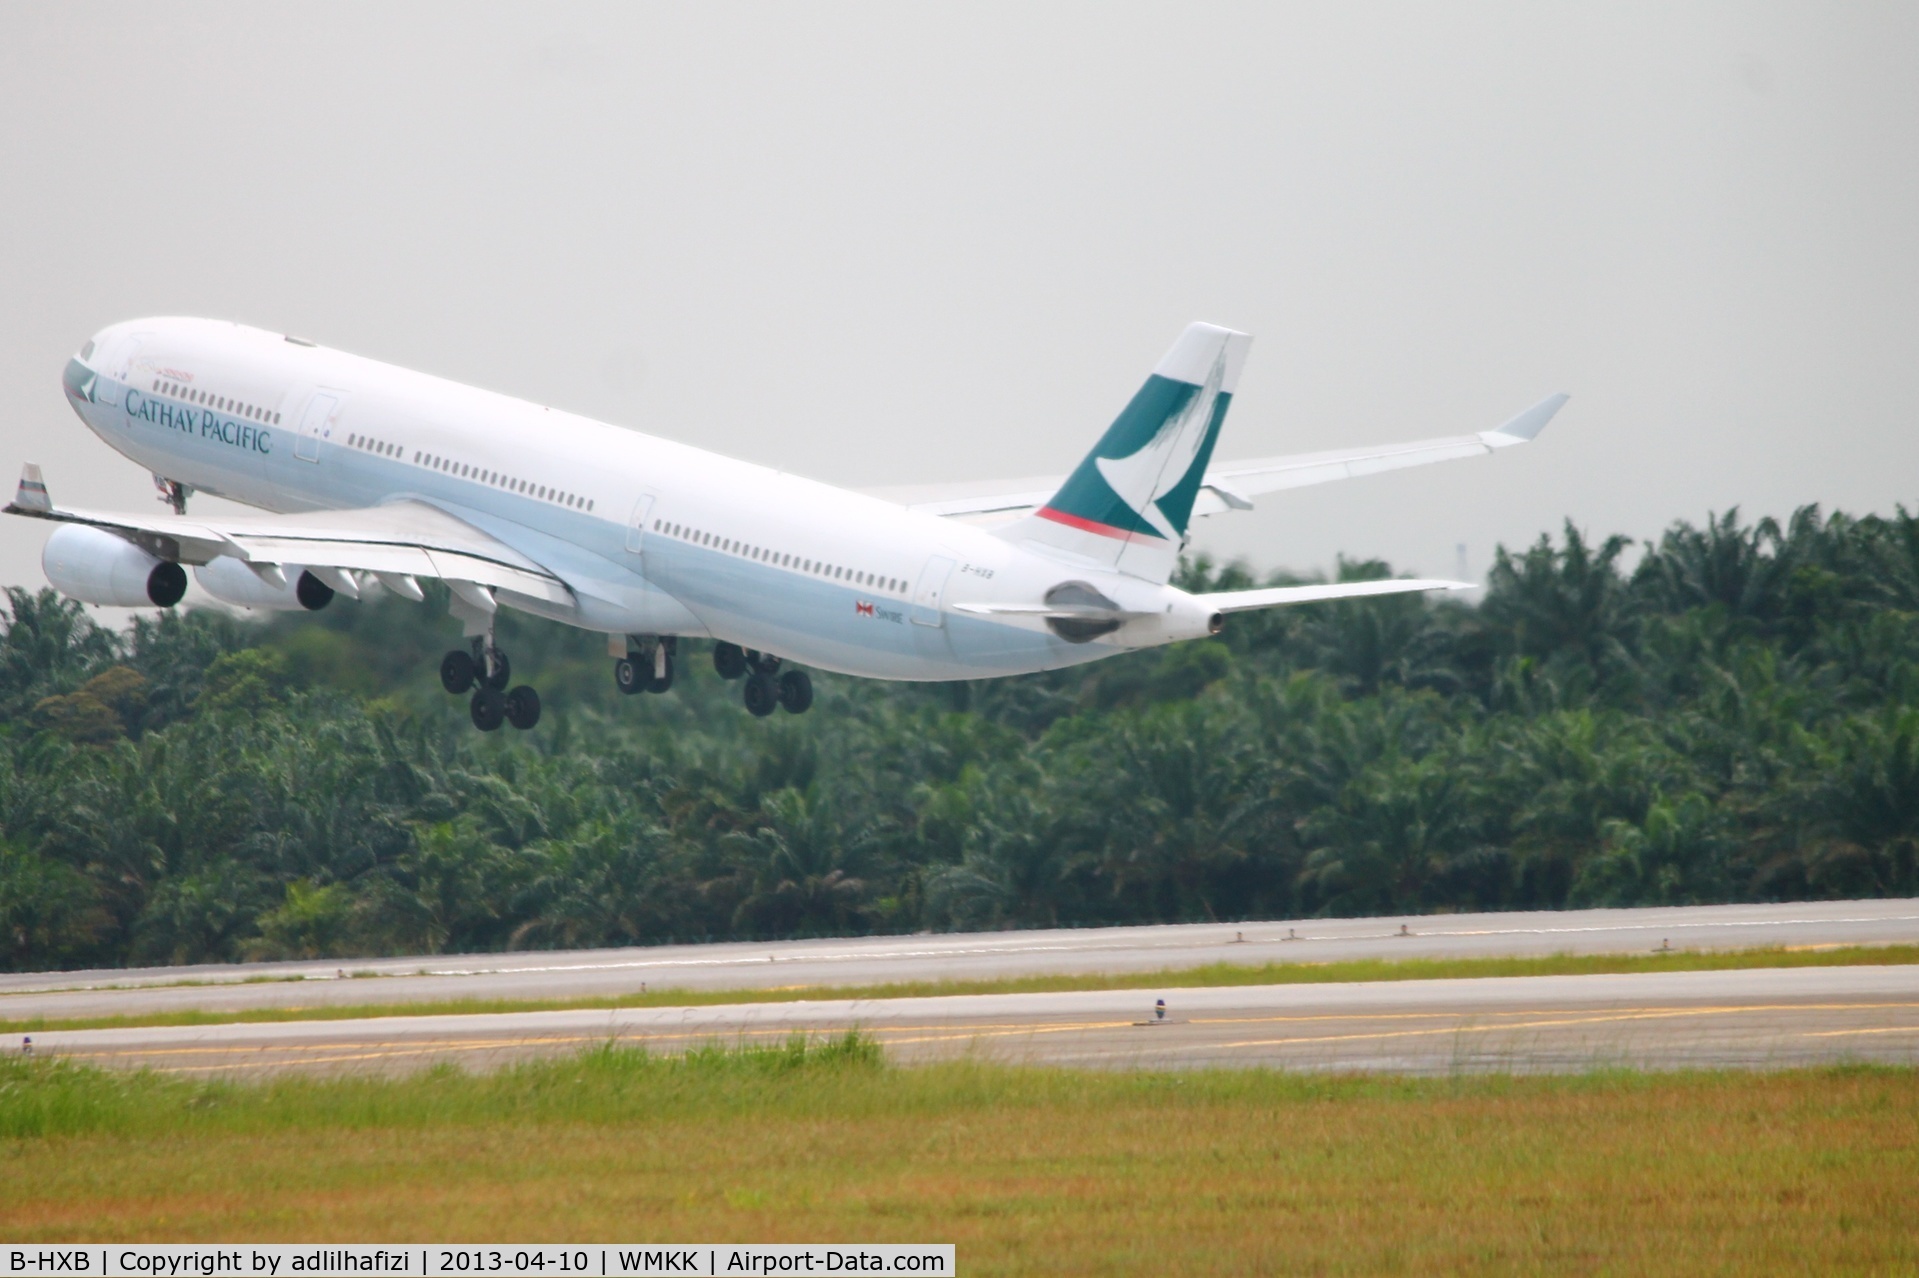 B-HXB, 1996 Airbus A340-313 C/N 137, Cathay Pacific A343 bound for HKG from KUL